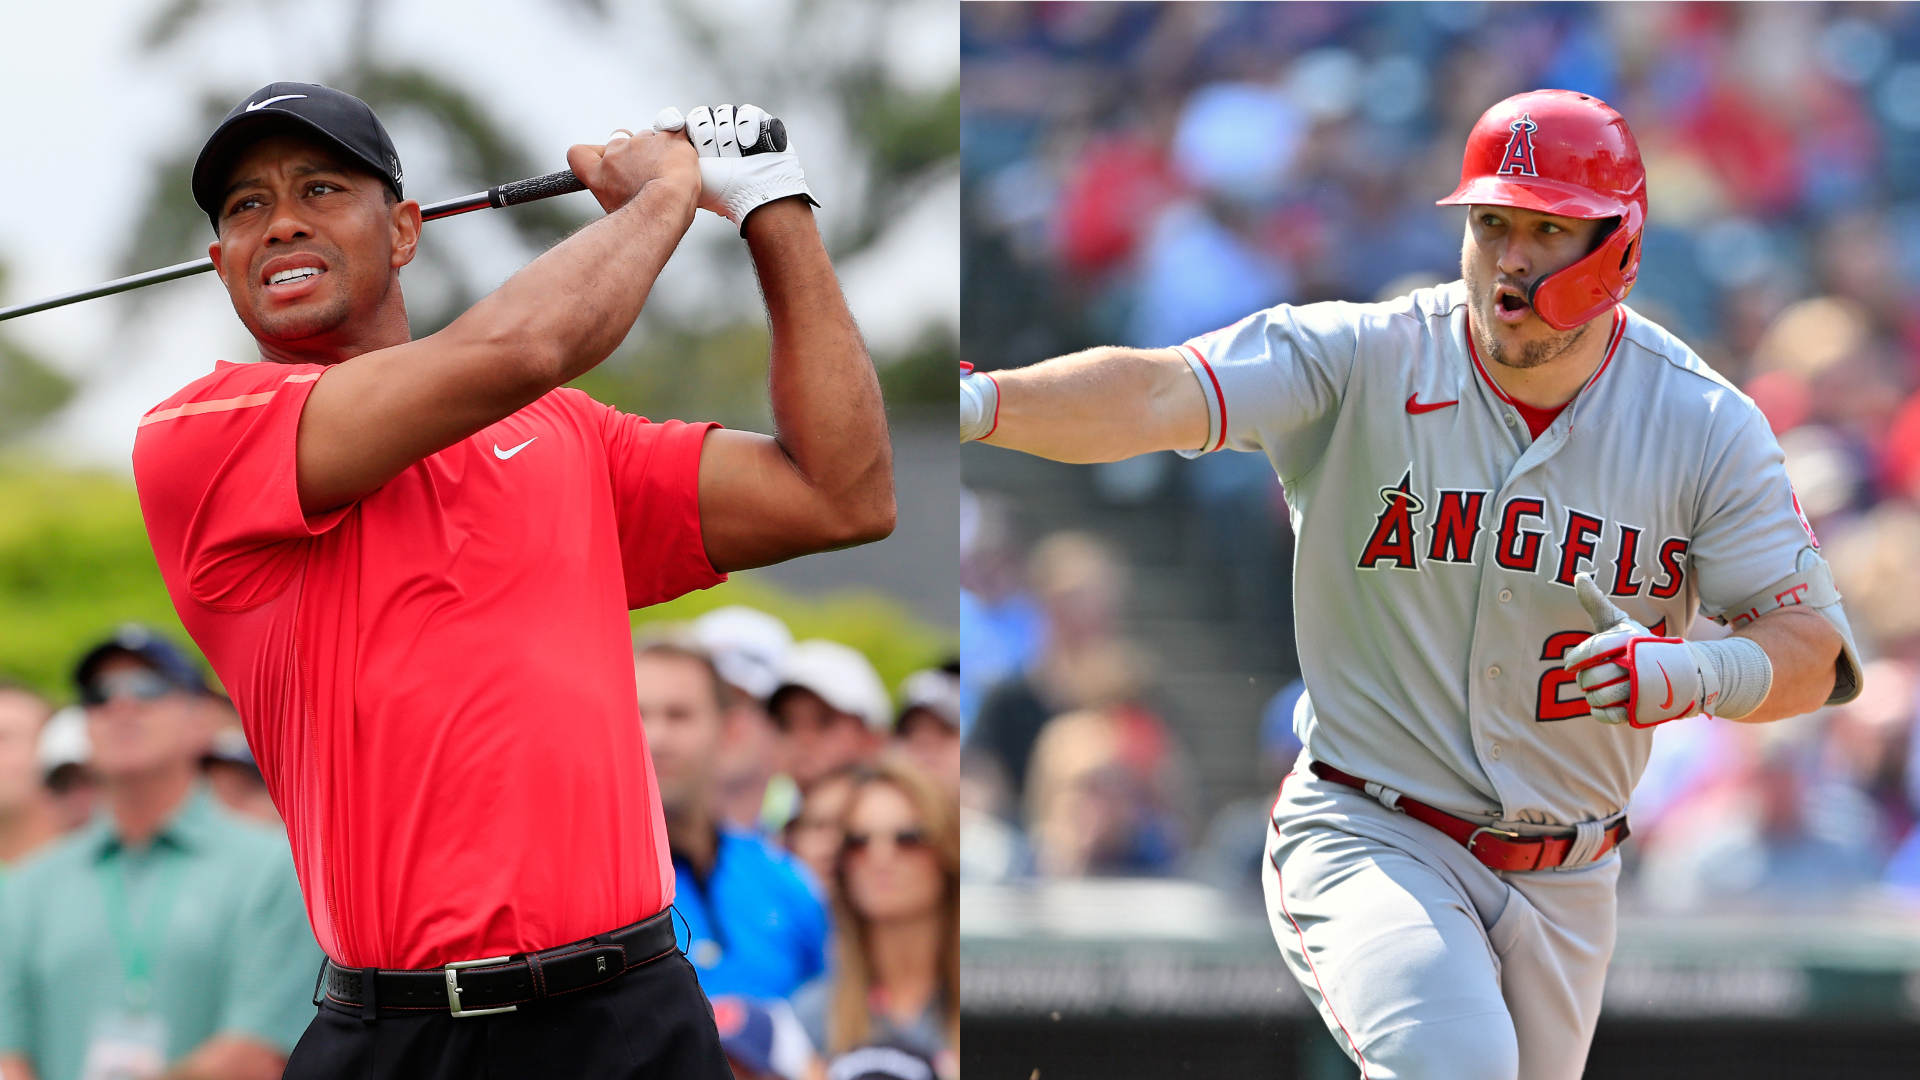 Check out Mike Trout and Tiger Woods' golf course being built in